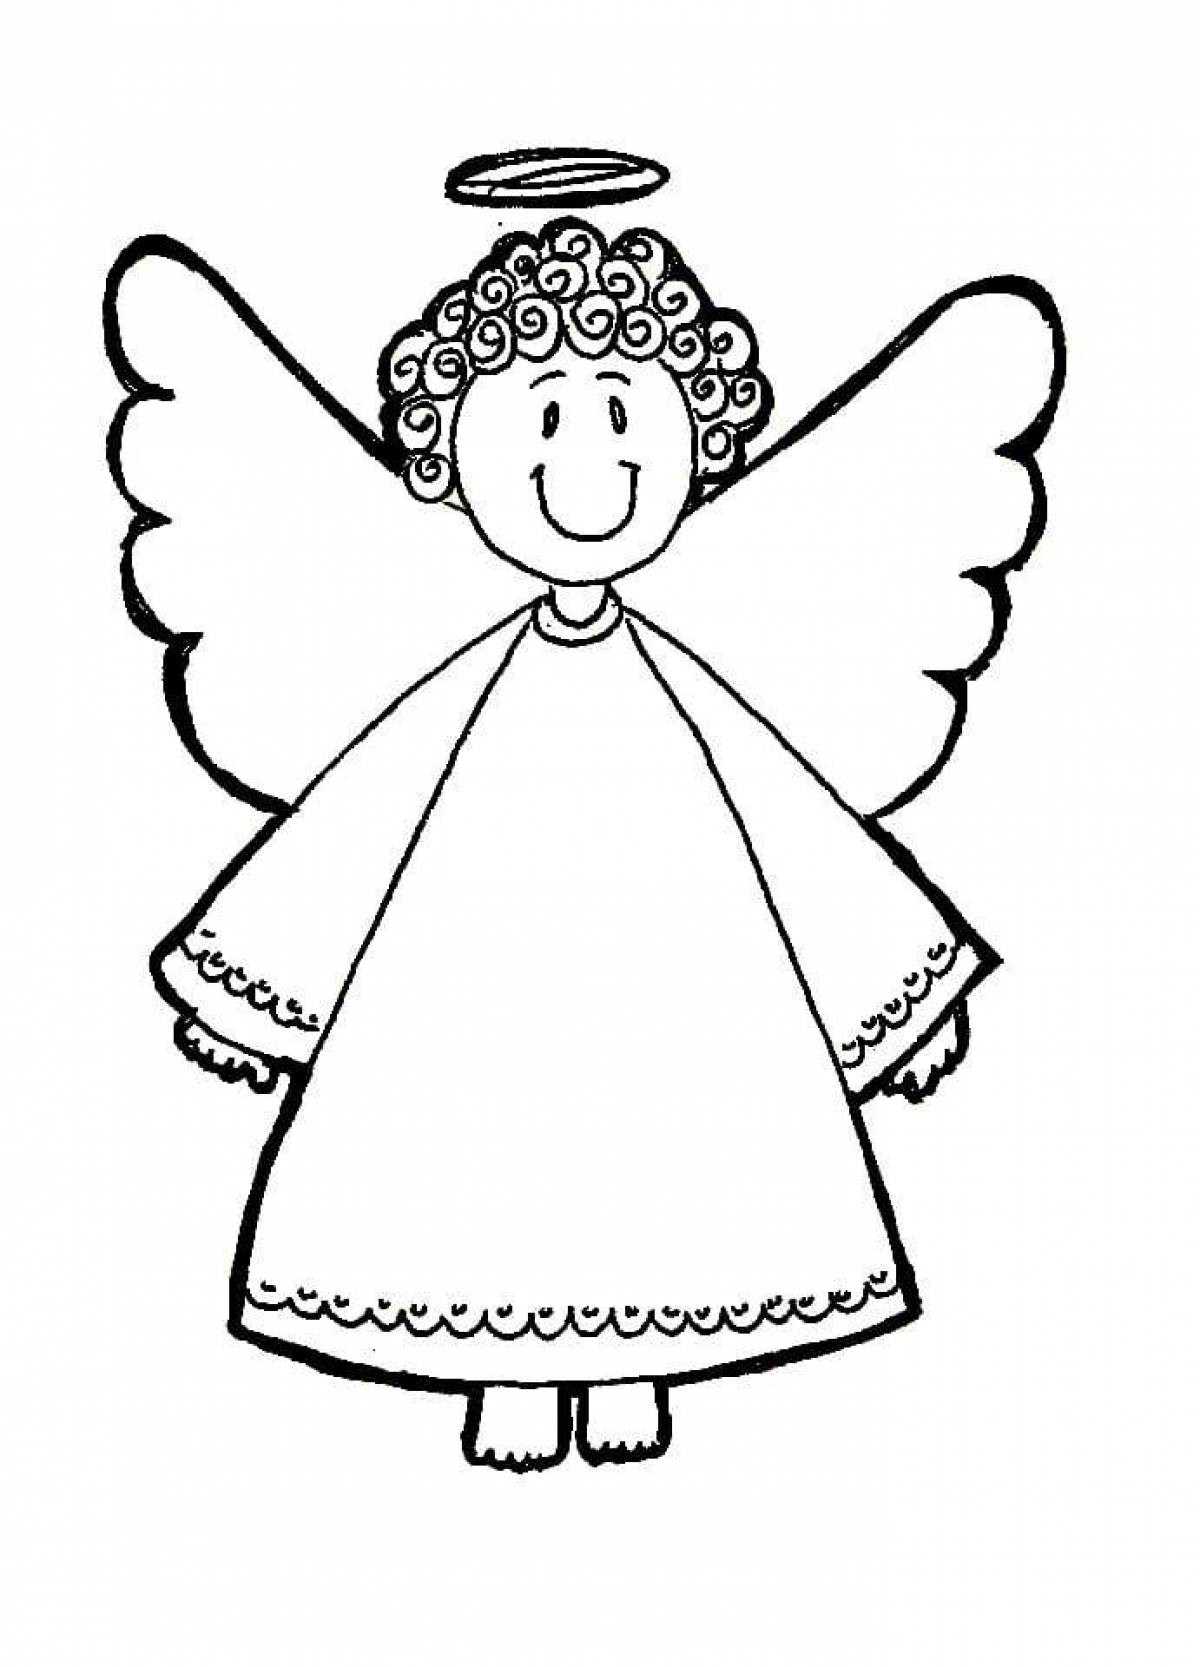 Bright coloring angel with wings for children